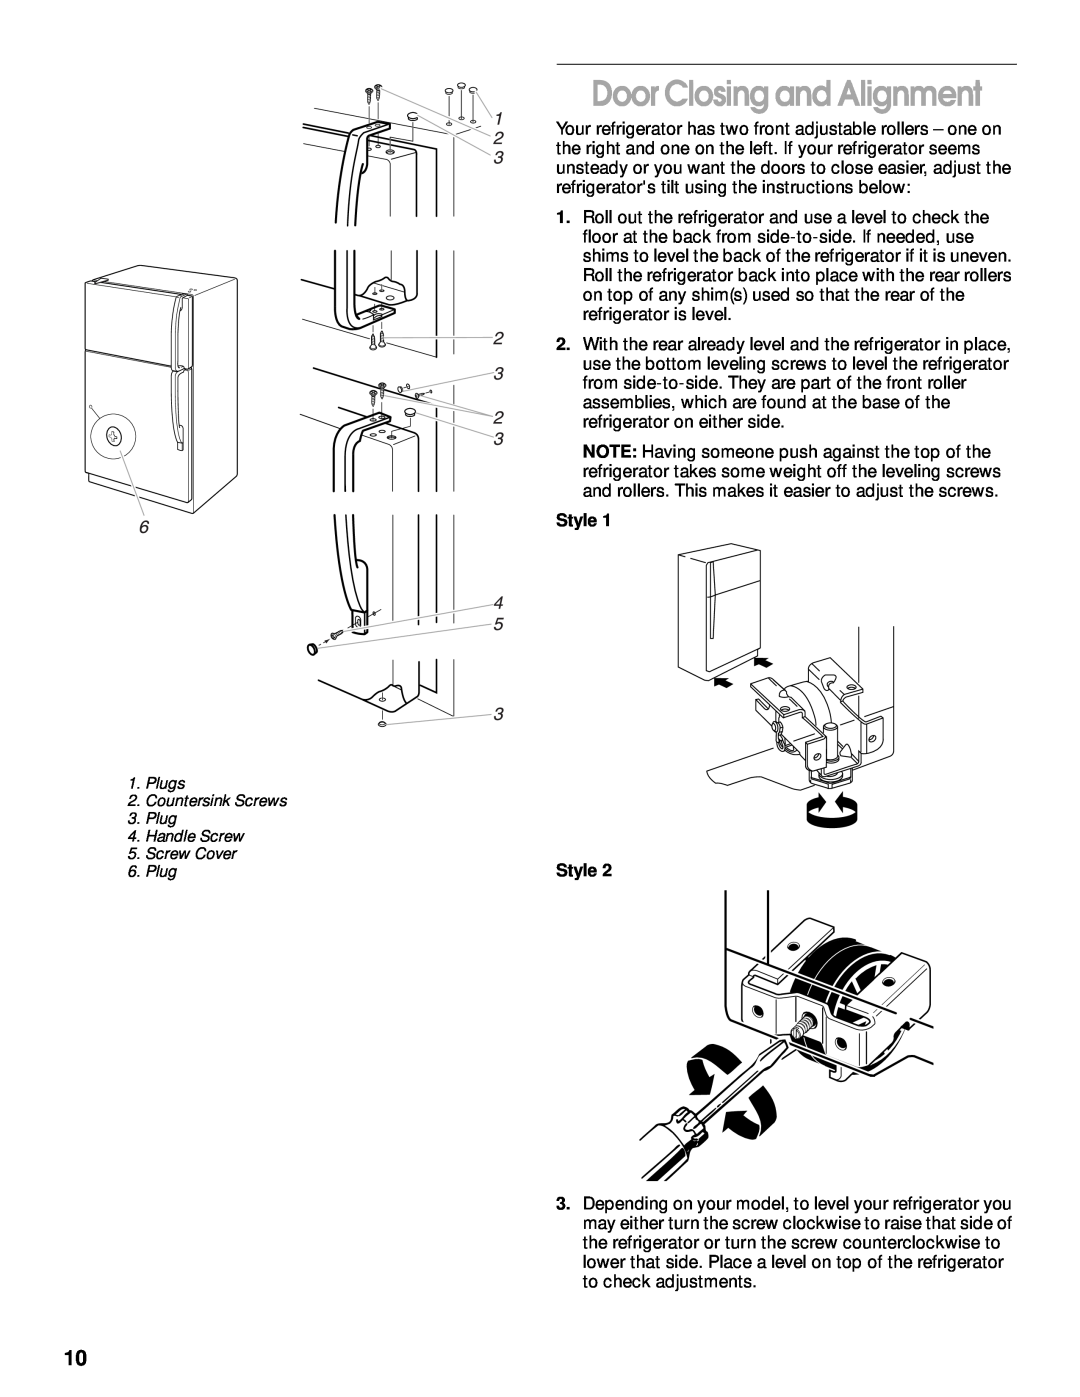 Whirlpool TT14DKXJW00 manual Door Closing and Alignment, Style Style 